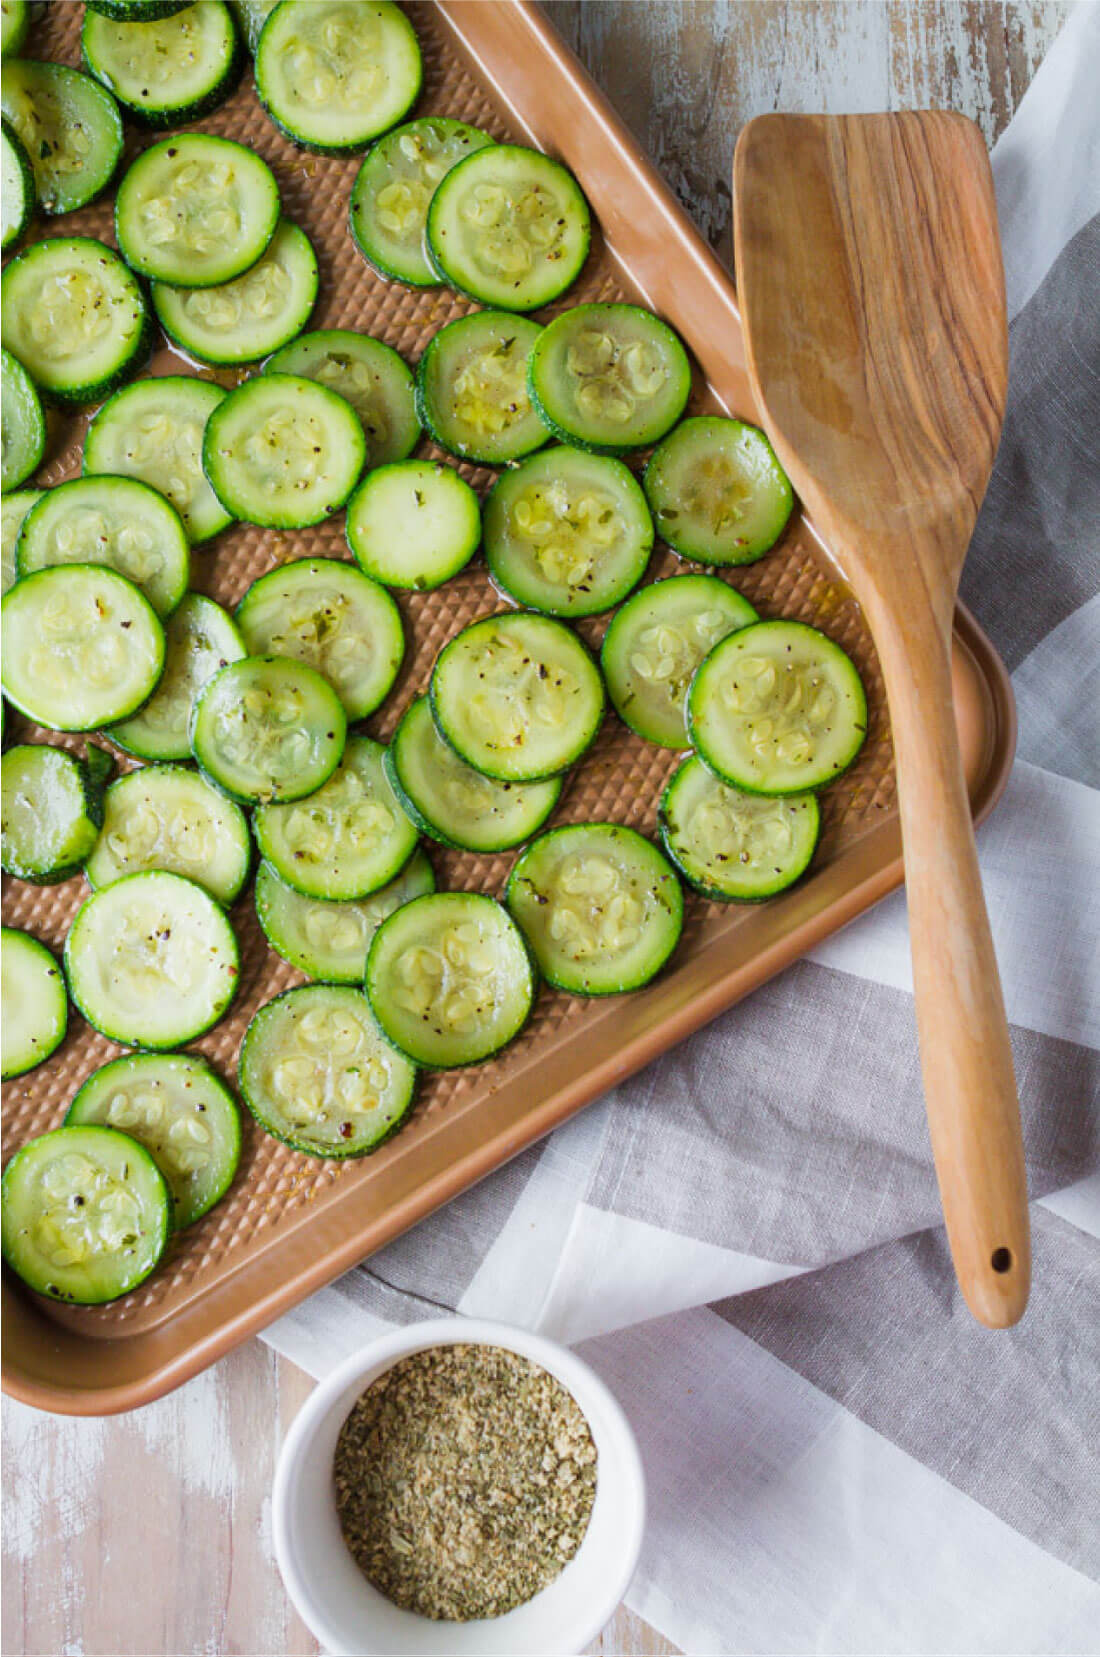 Baked Zucchini - make this simple side dish to serve with any meal. 